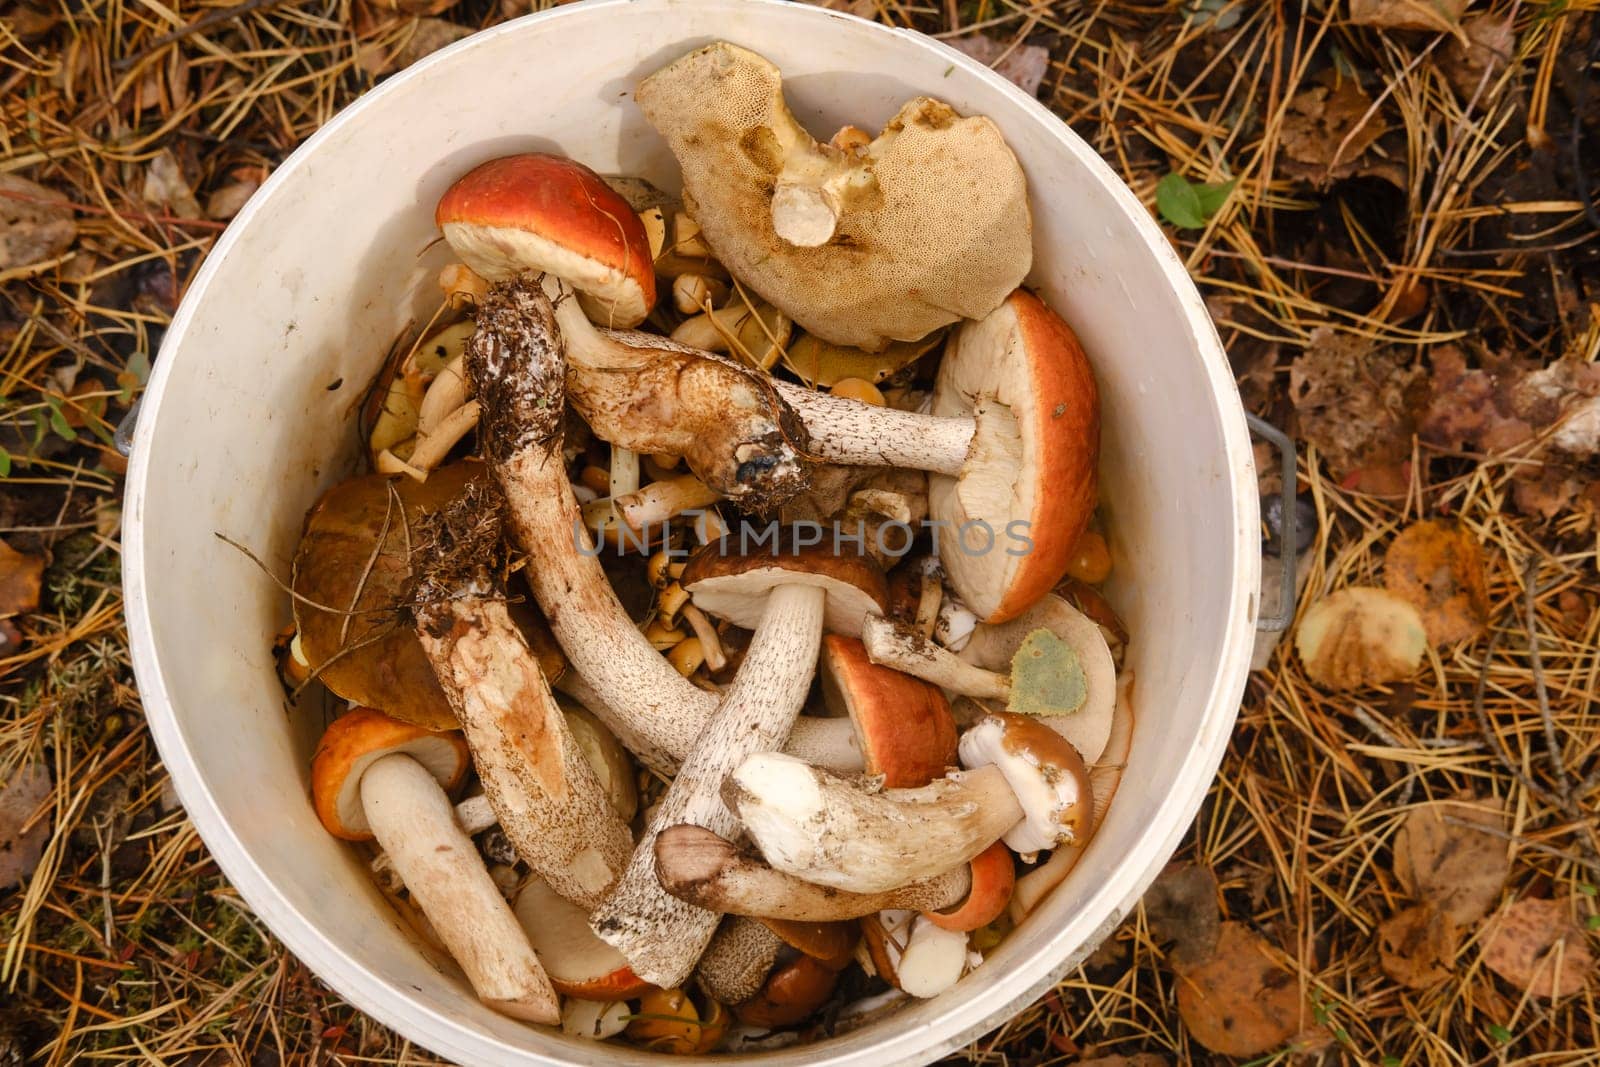 there are a lot of wild mushrooms of aspen and blackberries in the bucket . Mushrooms in the forest. Mushroom picking.